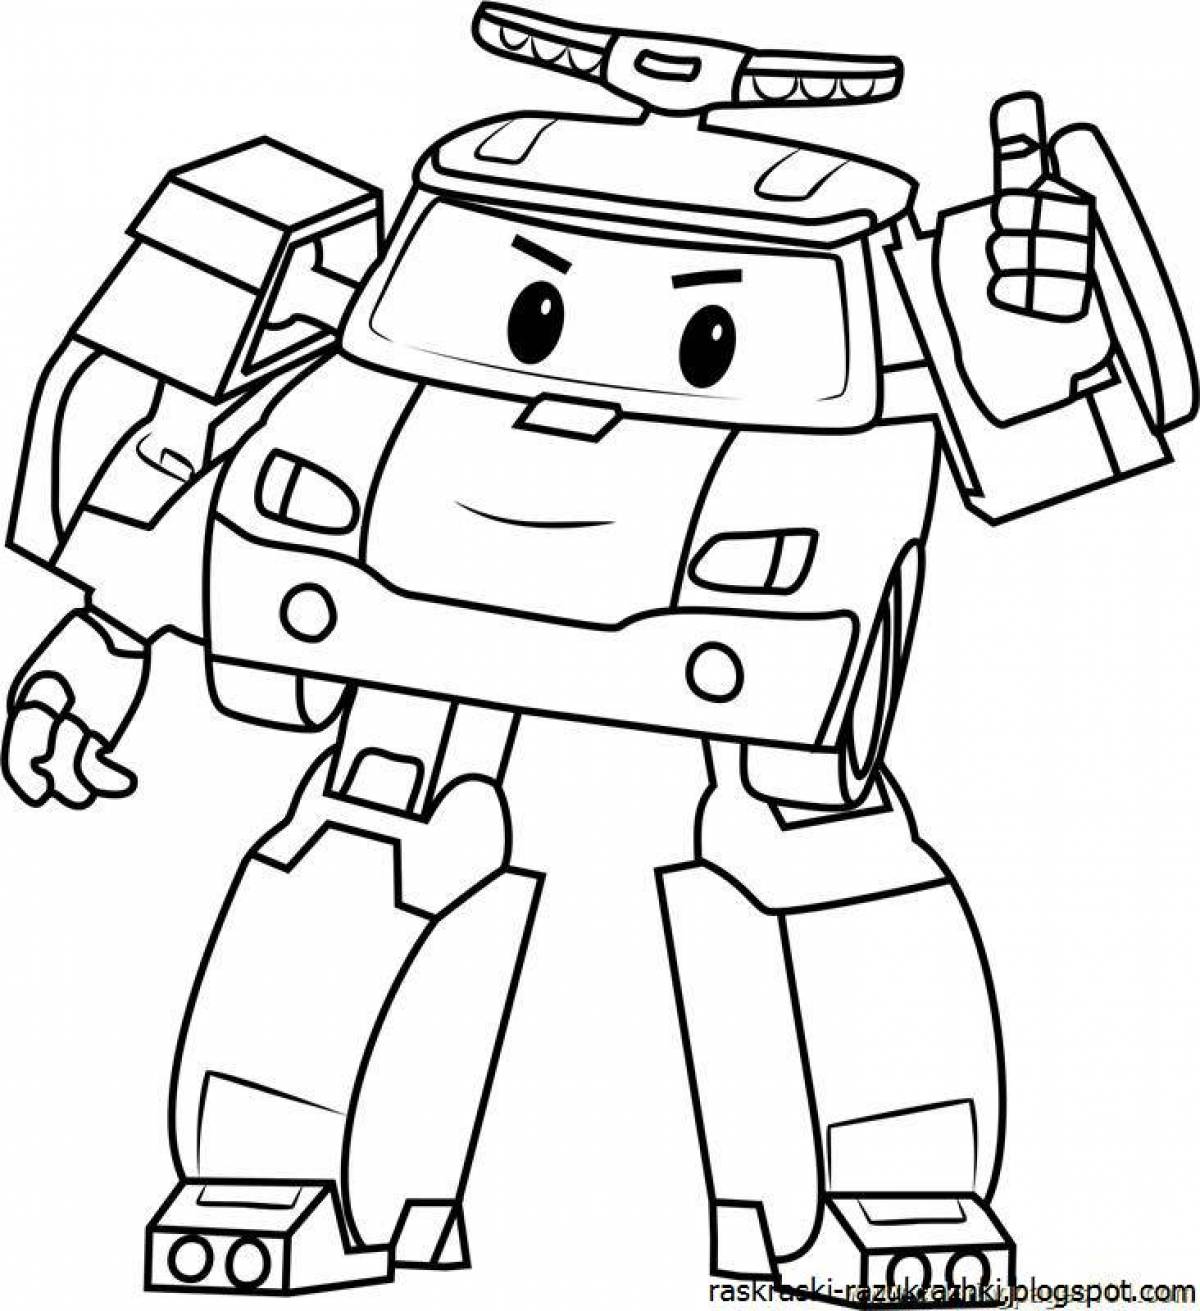 Playful robot coloring book for 5-6 year olds